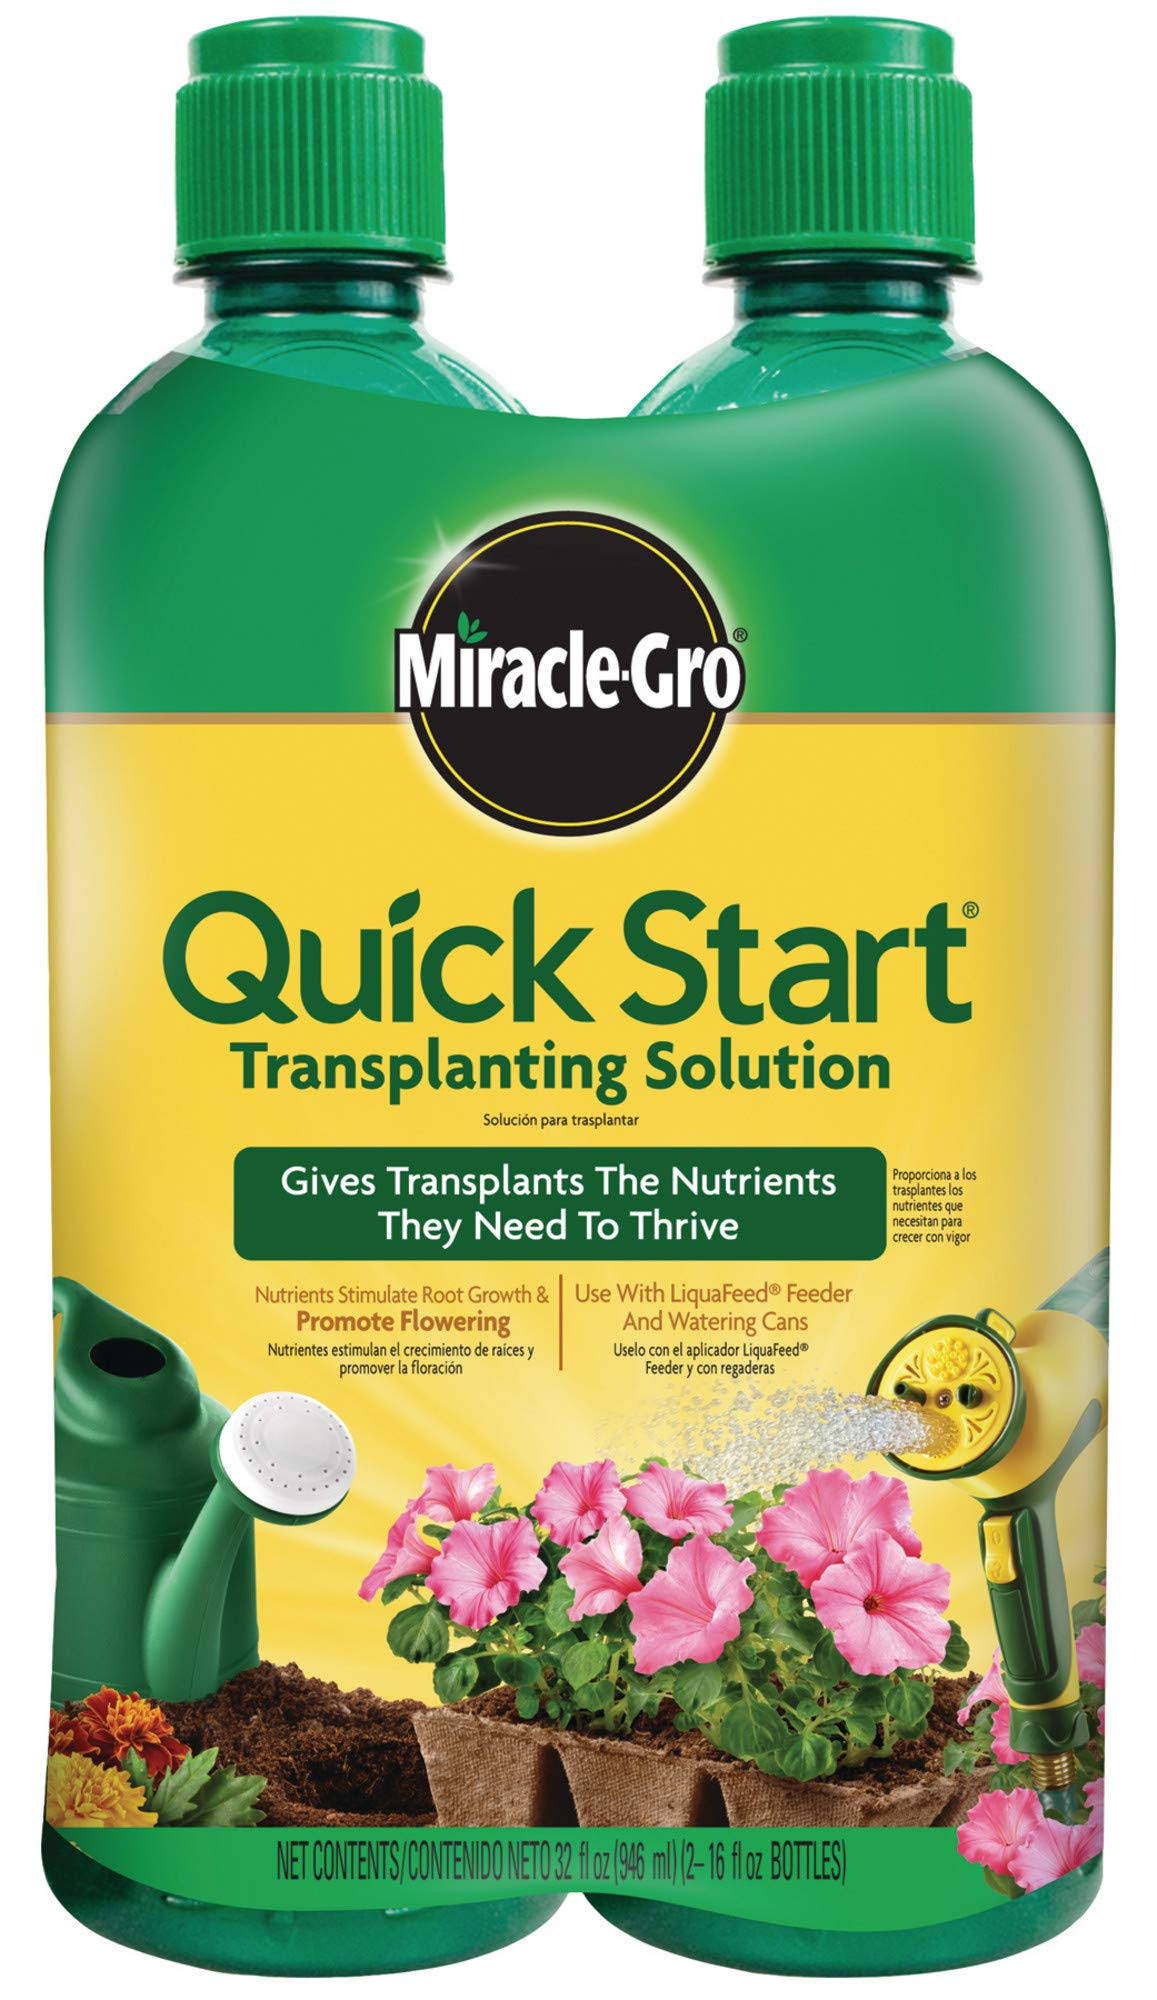 Miracle-Gro LiquaFeed Quick Start Transplanting Solution